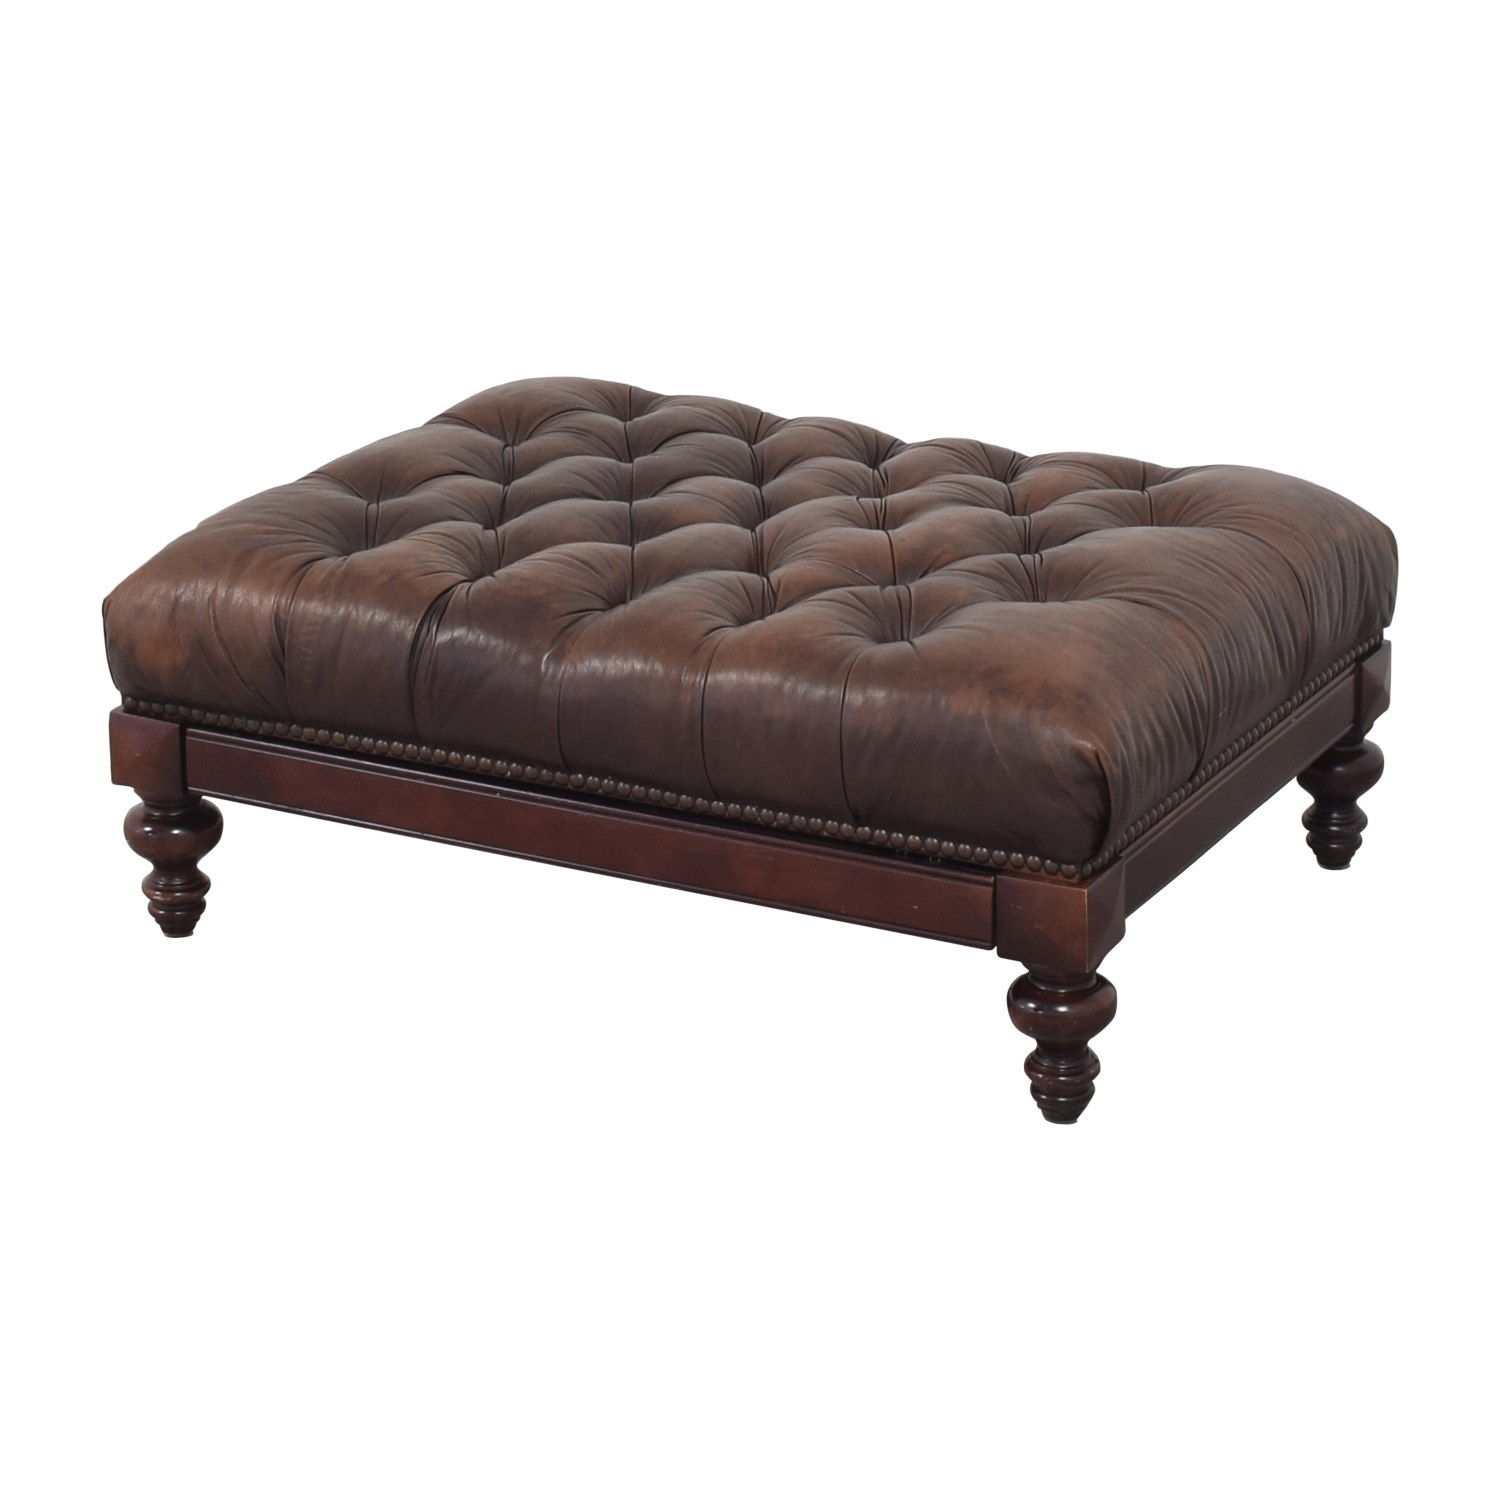 At Auction: DIRECTIONAL ROLLING OTTOMAN FOOTSTOOL. UNMARKED